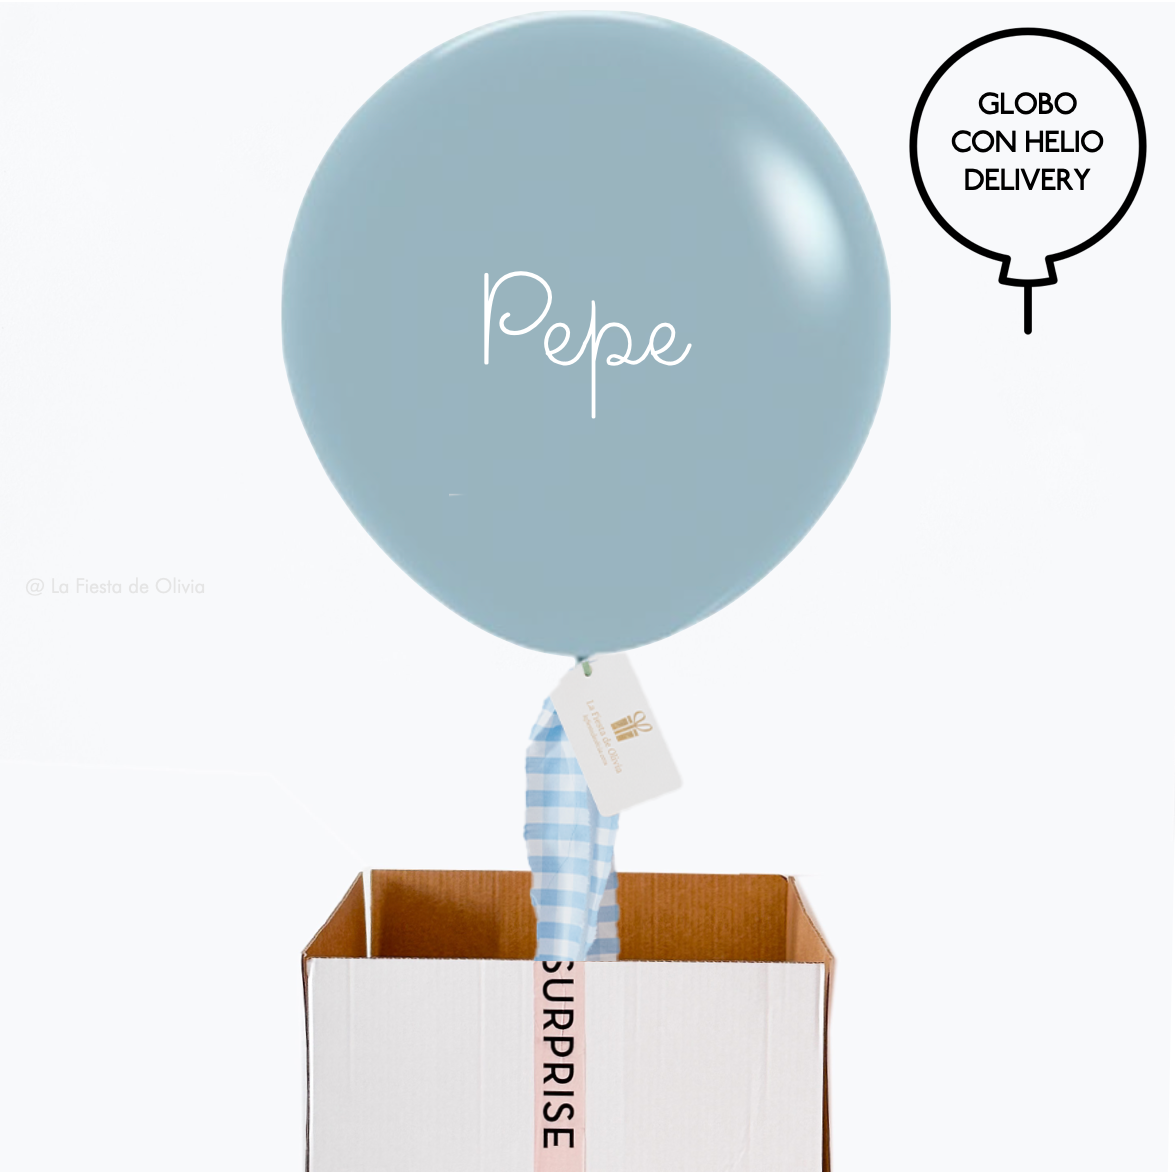 ICONIC PREMIUM Dust Blue inflated balloon